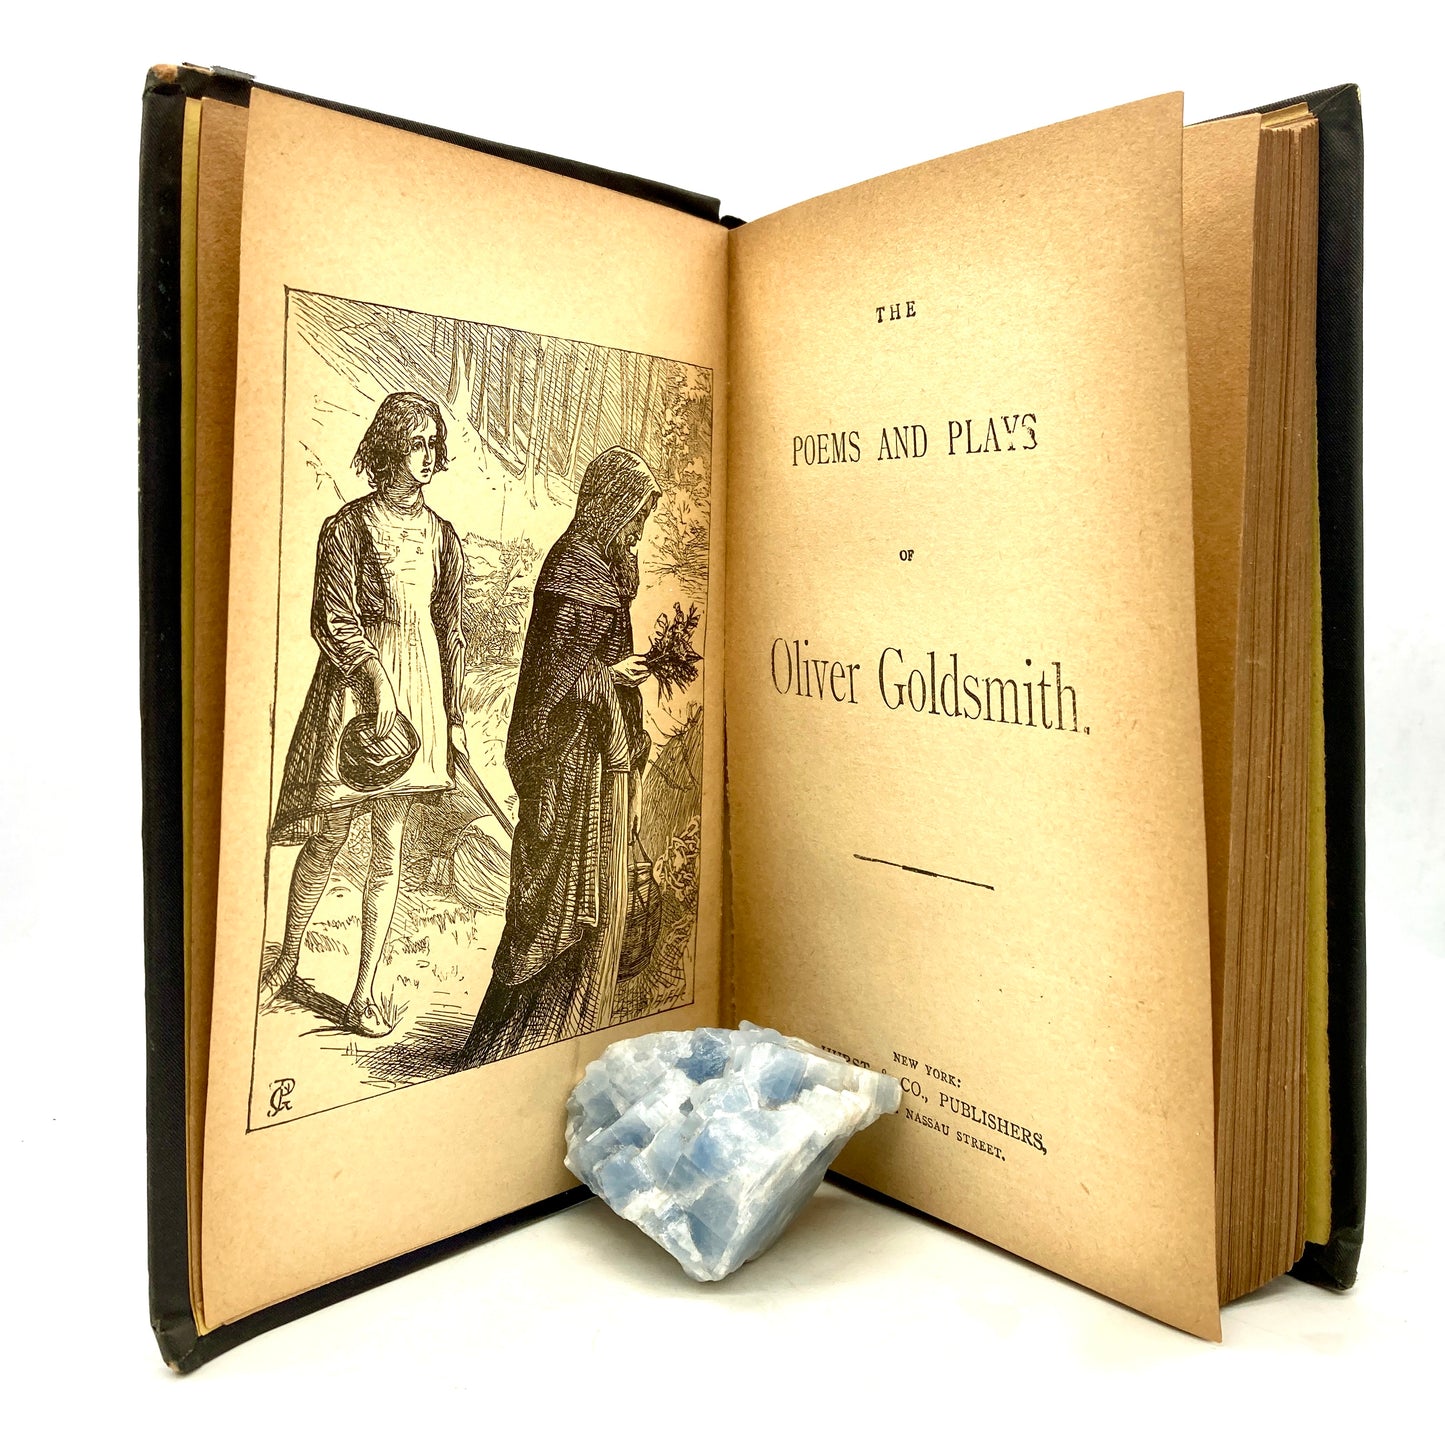 GOLDSMITH, Oliver "The Poems and Plays of Goldsmith" [Hurst & Co, n.d./c1890s]